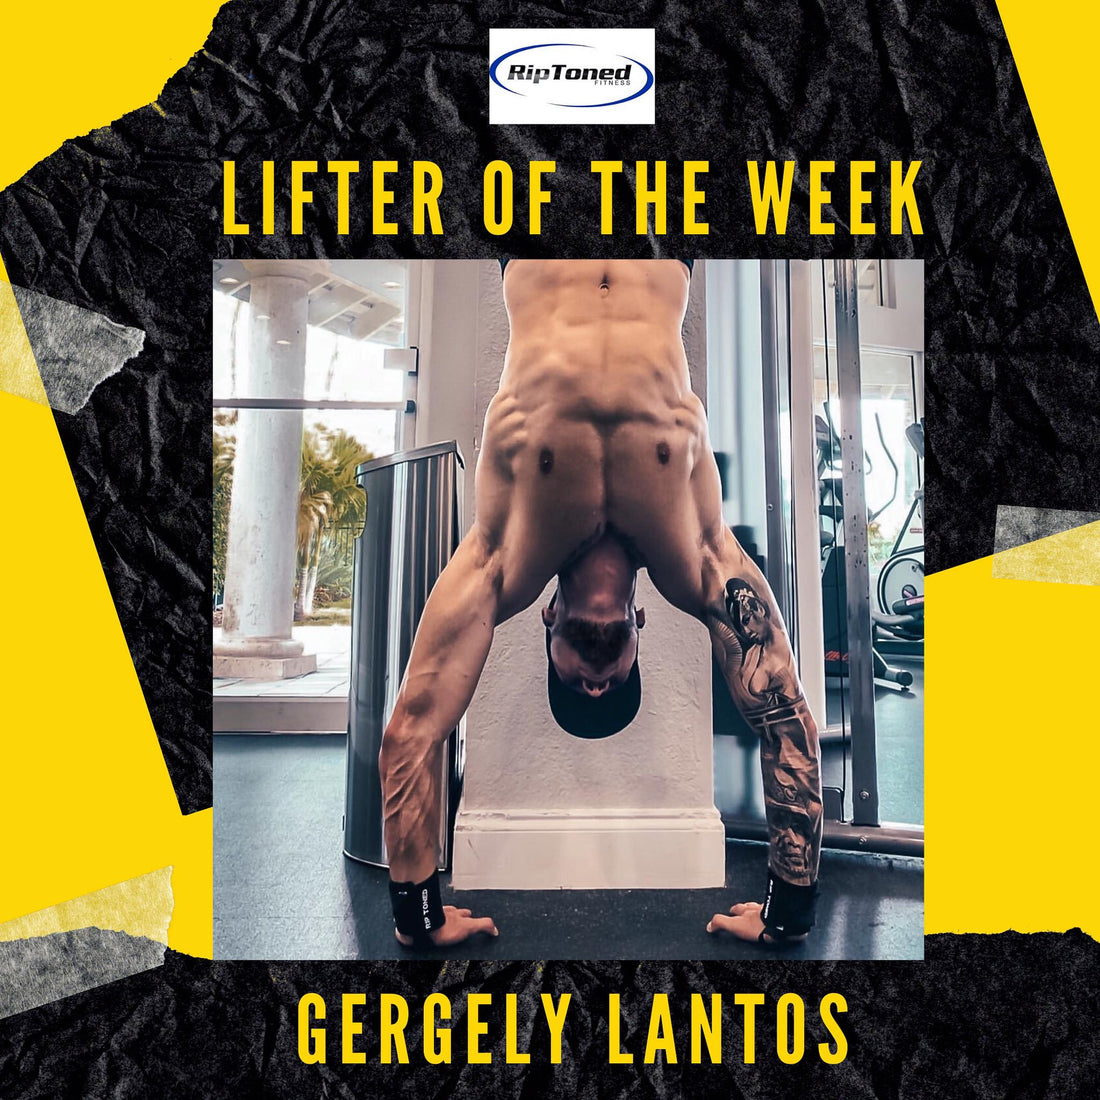 Lifter of the Week - Gergely Lantos - Rip Toned